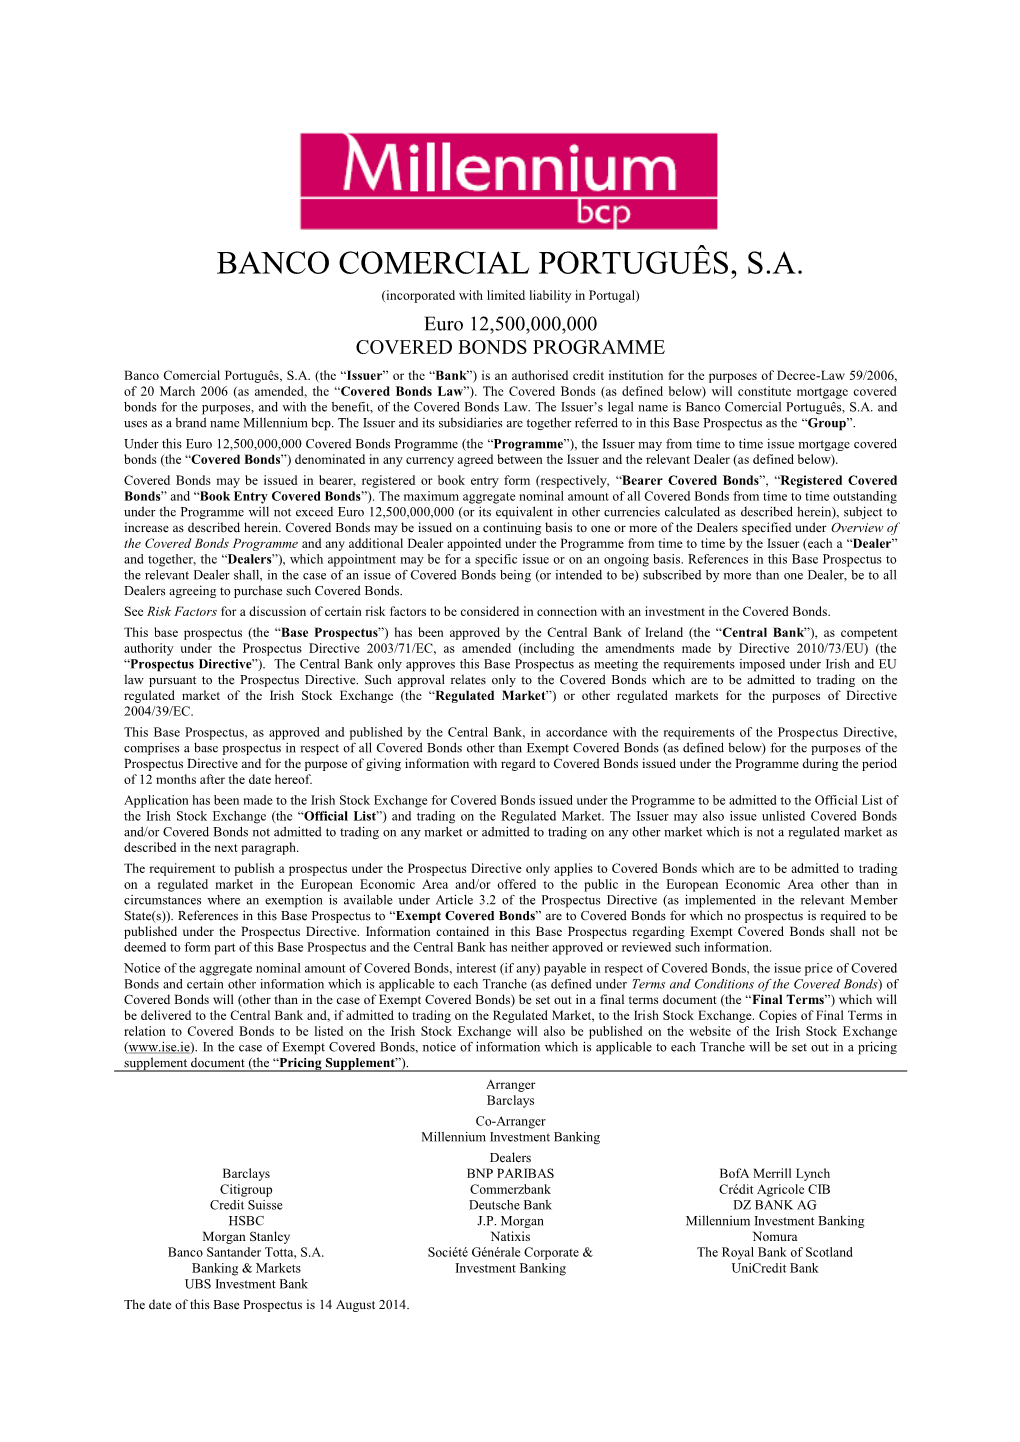 BANCO COMERCIAL PORTUGUÊS, S.A. (Incorporated with Limited Liability in Portugal) Euro 12,500,000,000 COVERED BONDS PROGRAMME Banco Comercial Português, S.A